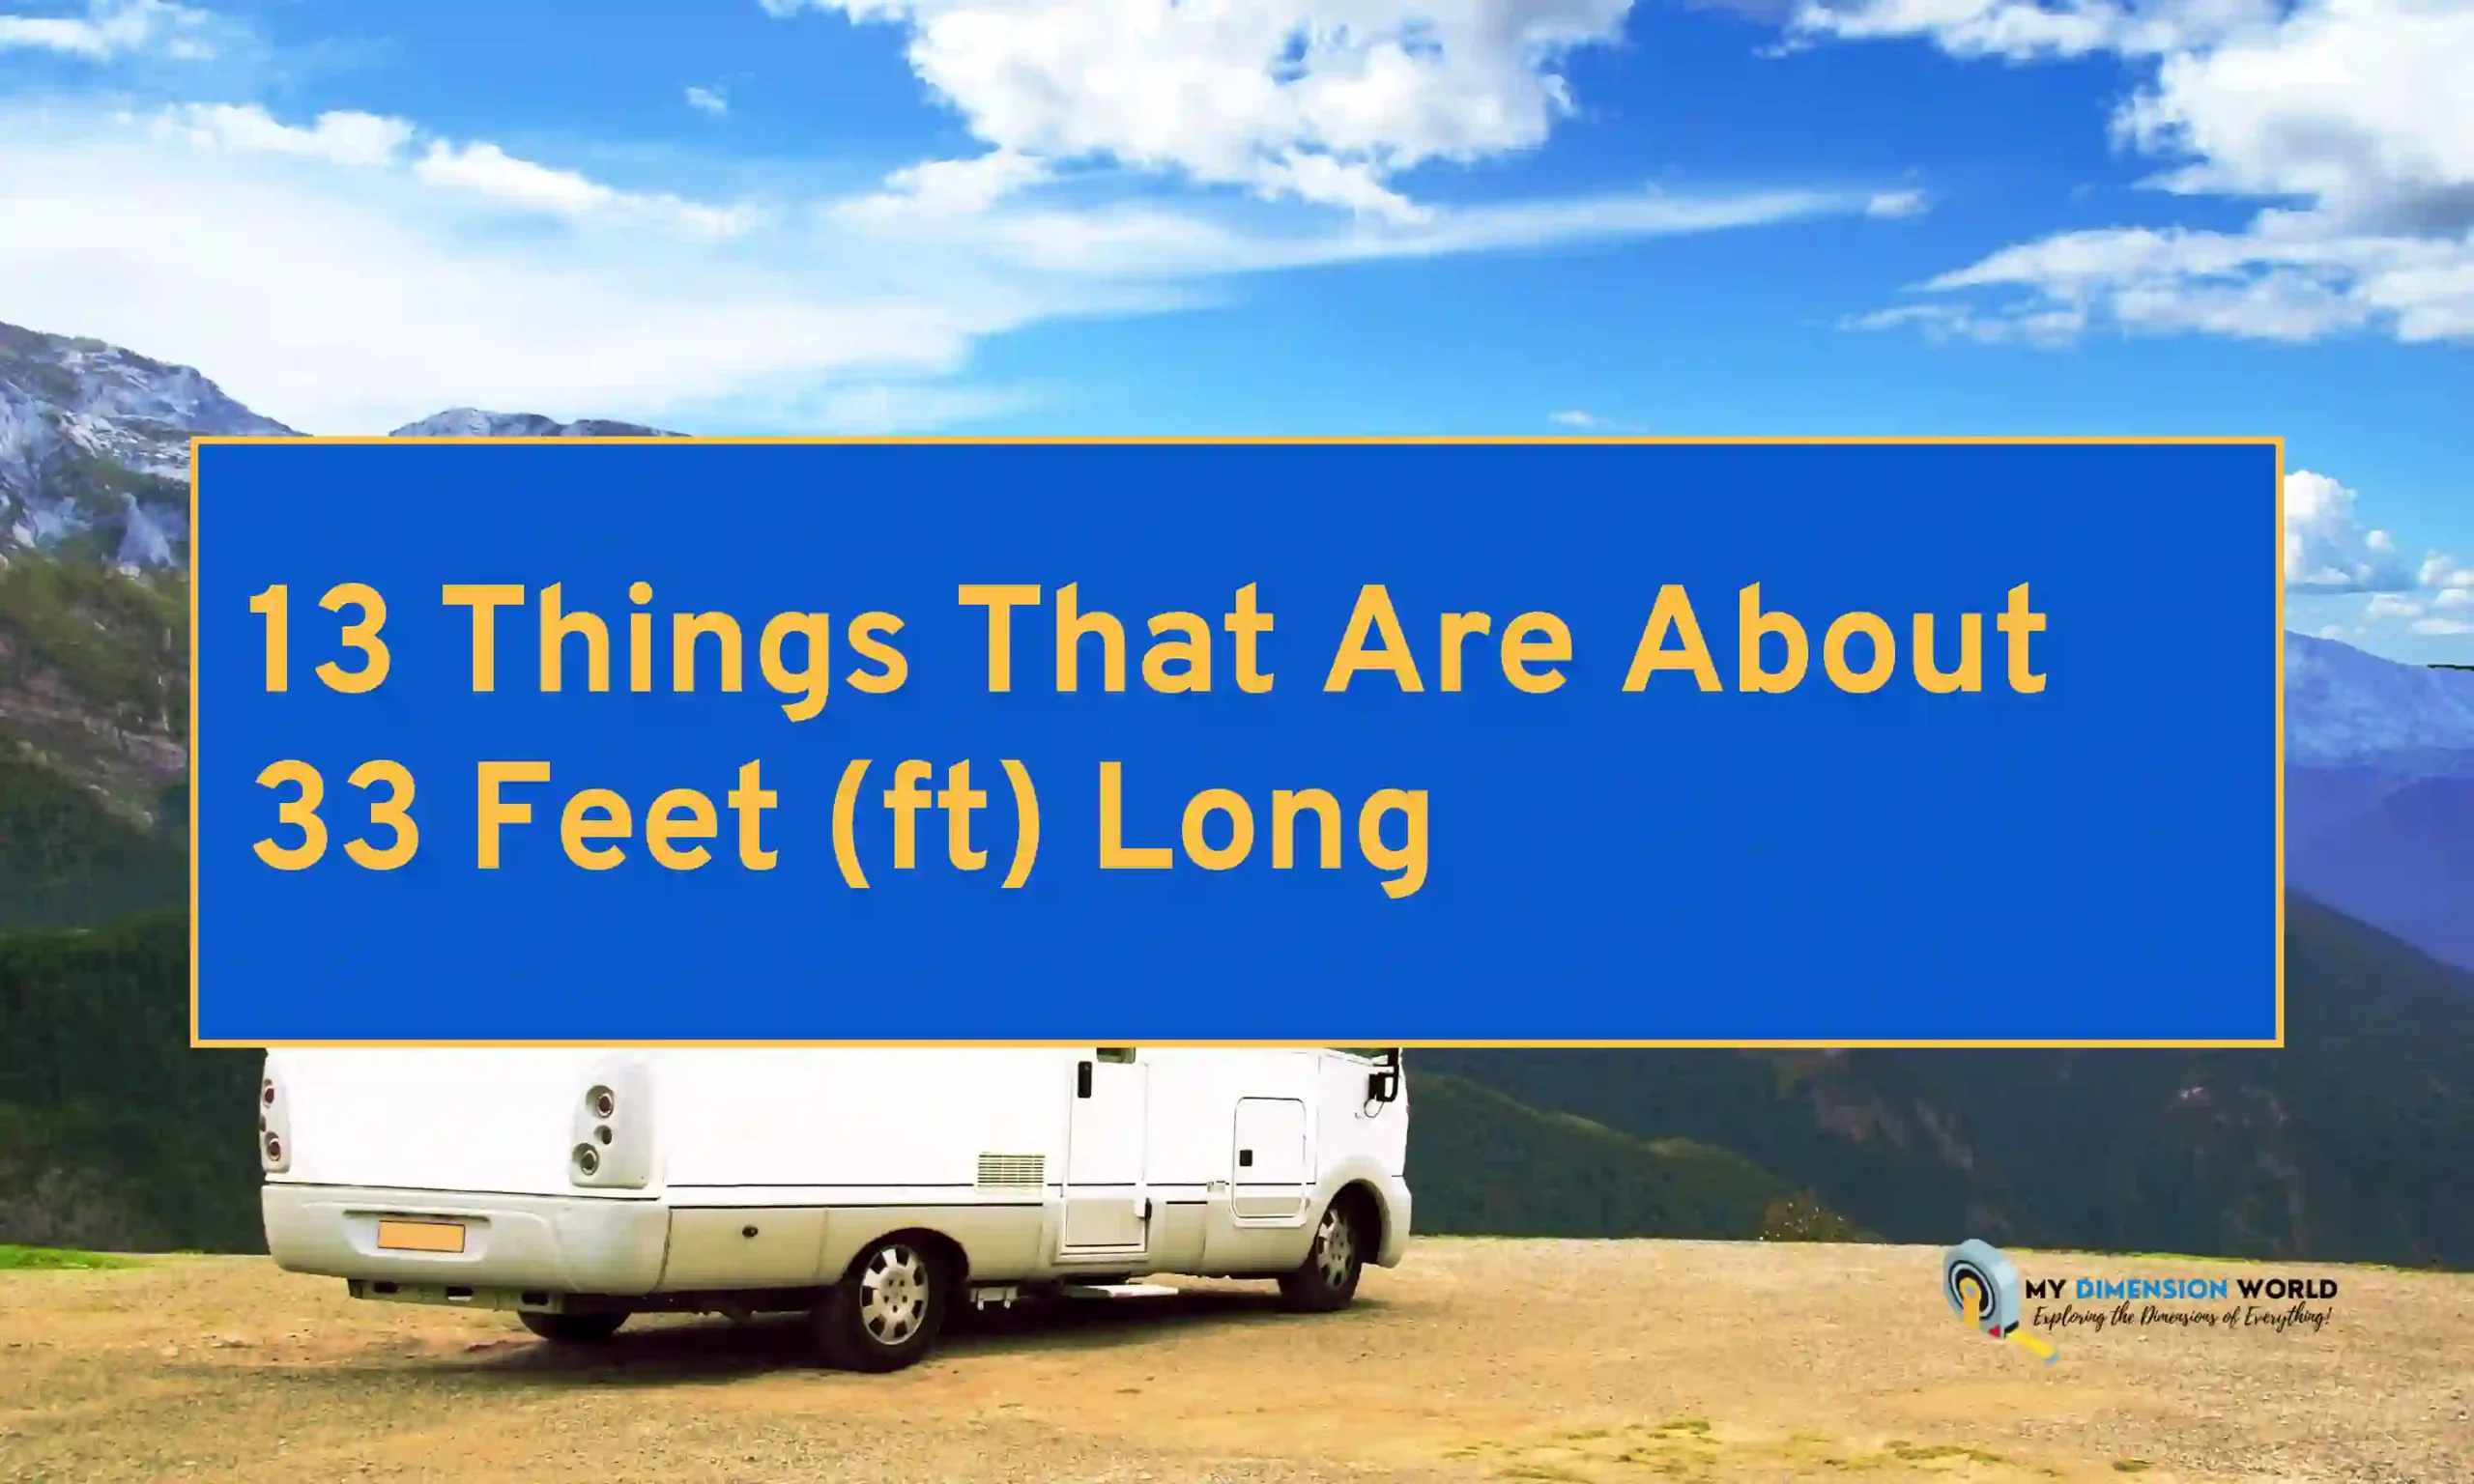 13 Things That Are About 33 Feet (ft) Long